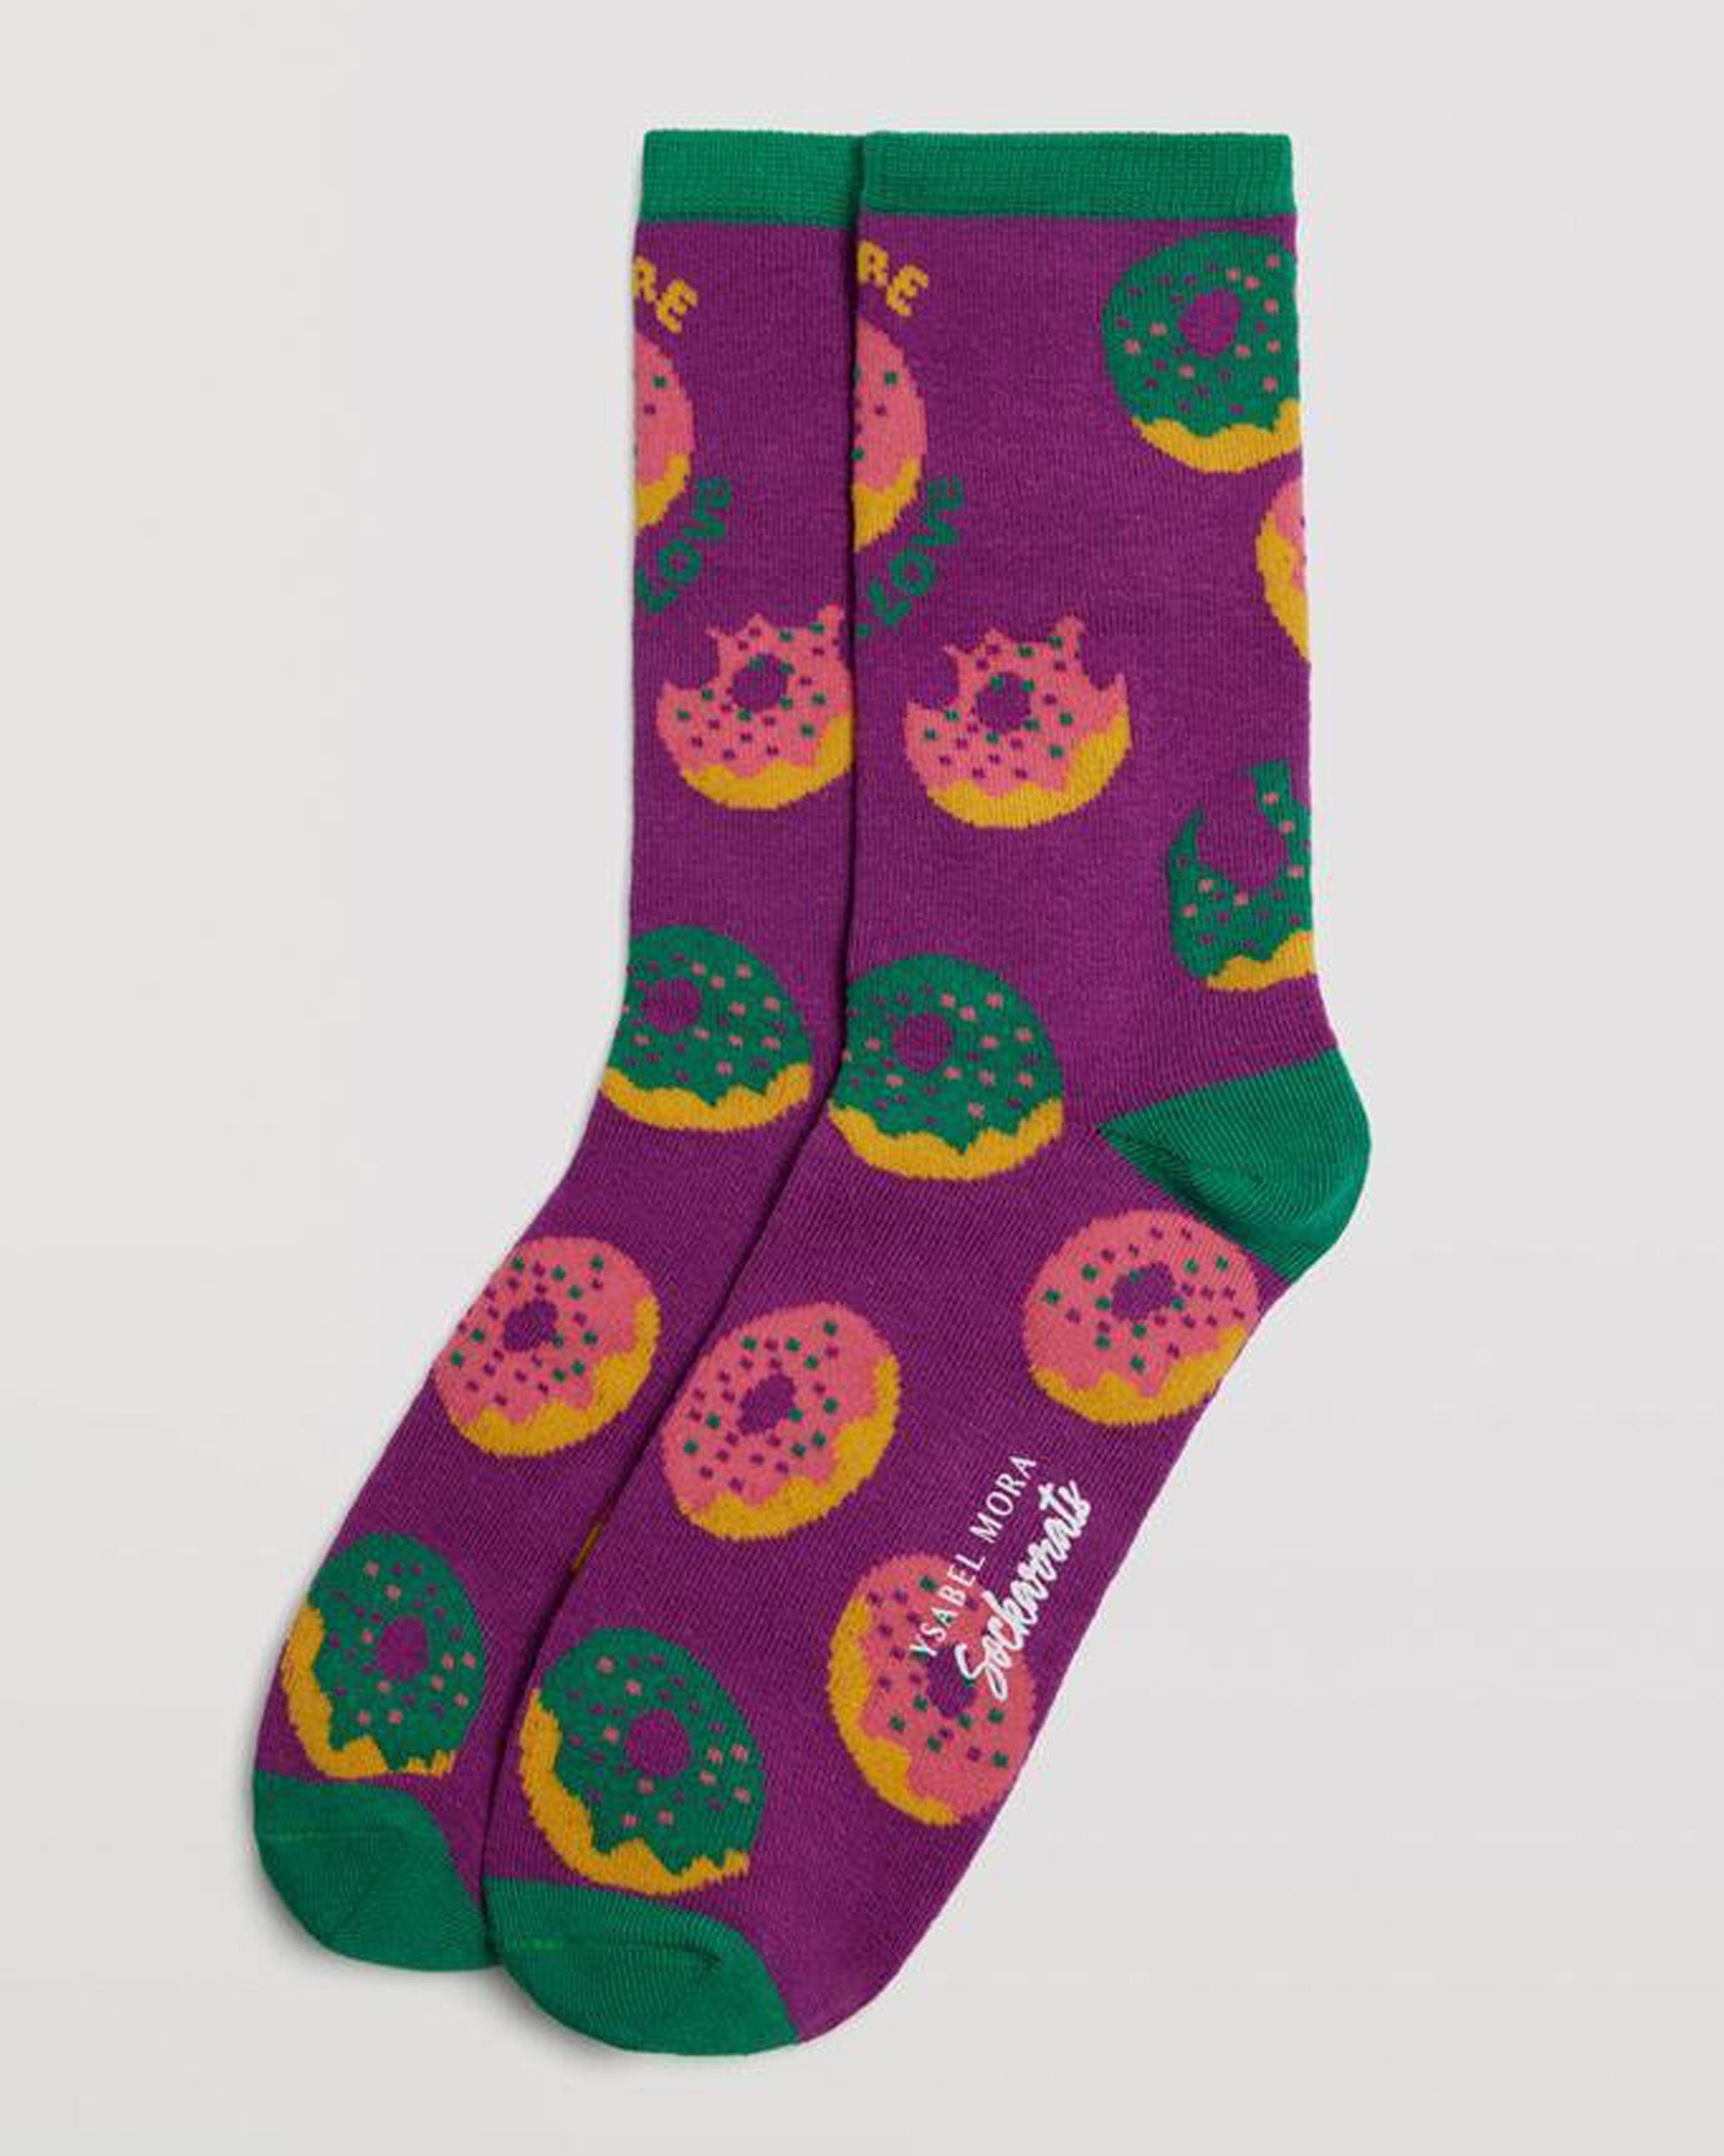 Ysabel Mora 12905 Donut Sock - Purple cotton socks with an all over pattern of ring donuts with sprinkles in green, pink and mustard, green toe, heel and cuff.